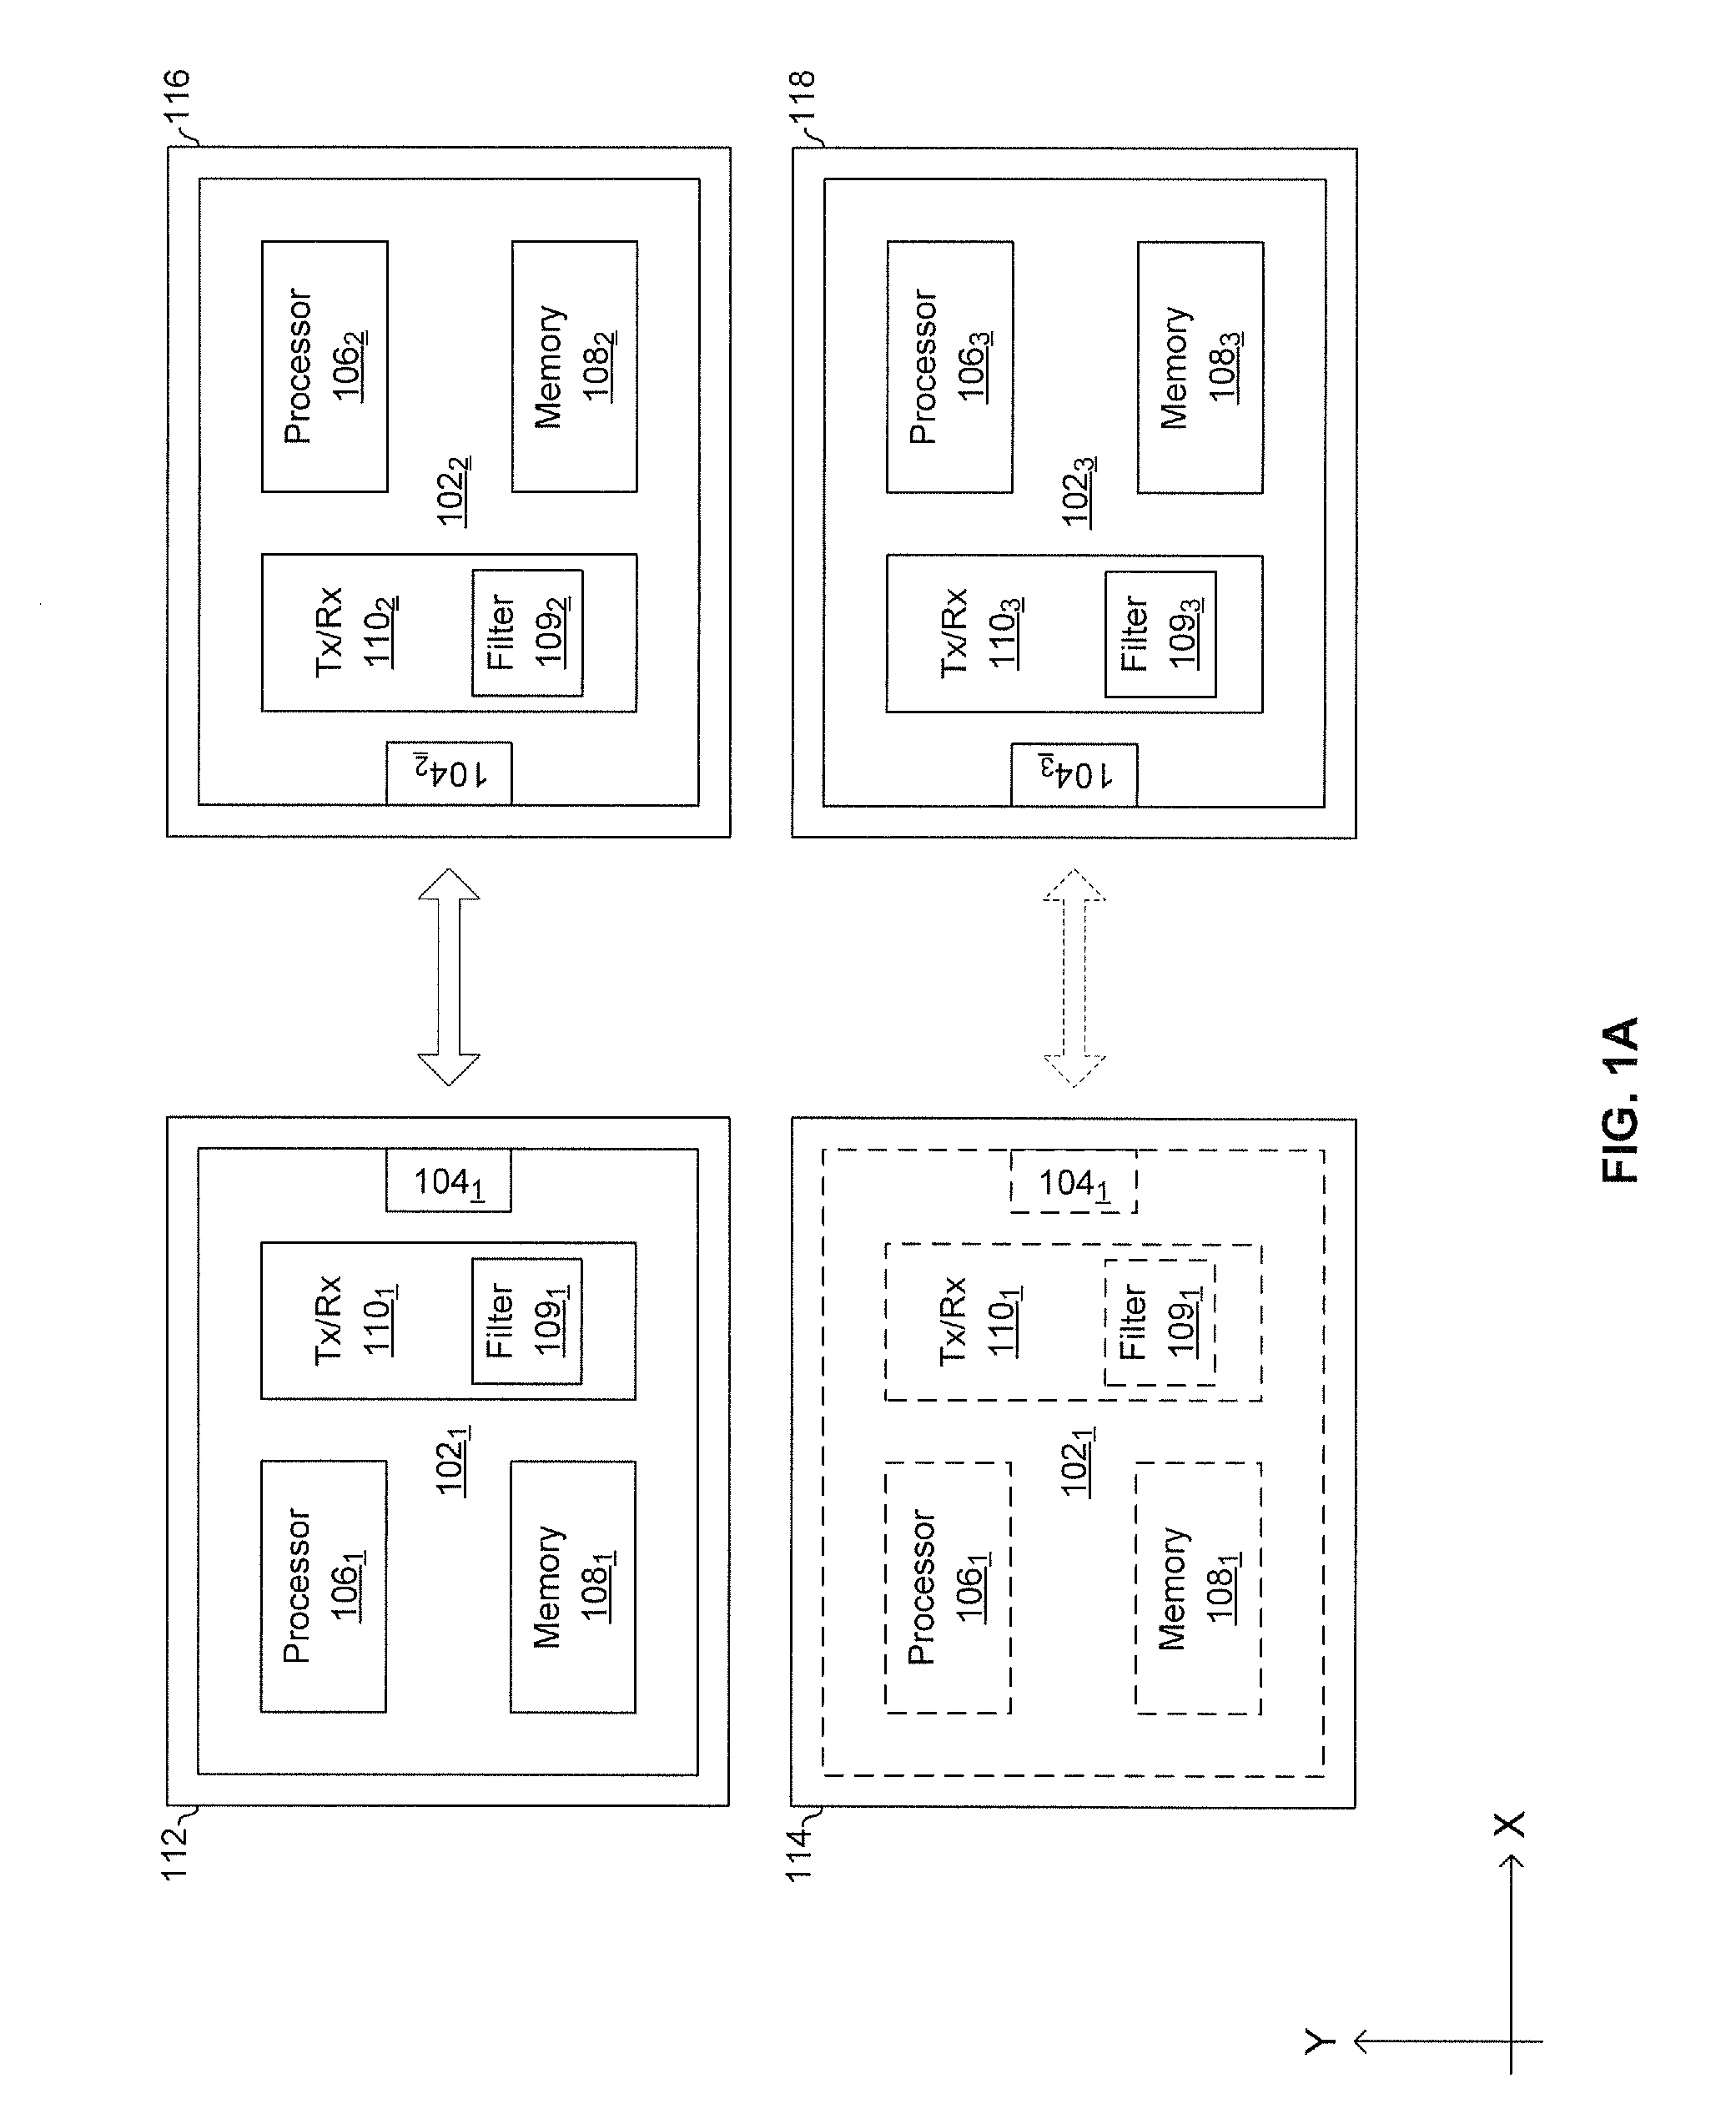 Method and system for point-to-point wireless communications utilizing leaky wave antennas